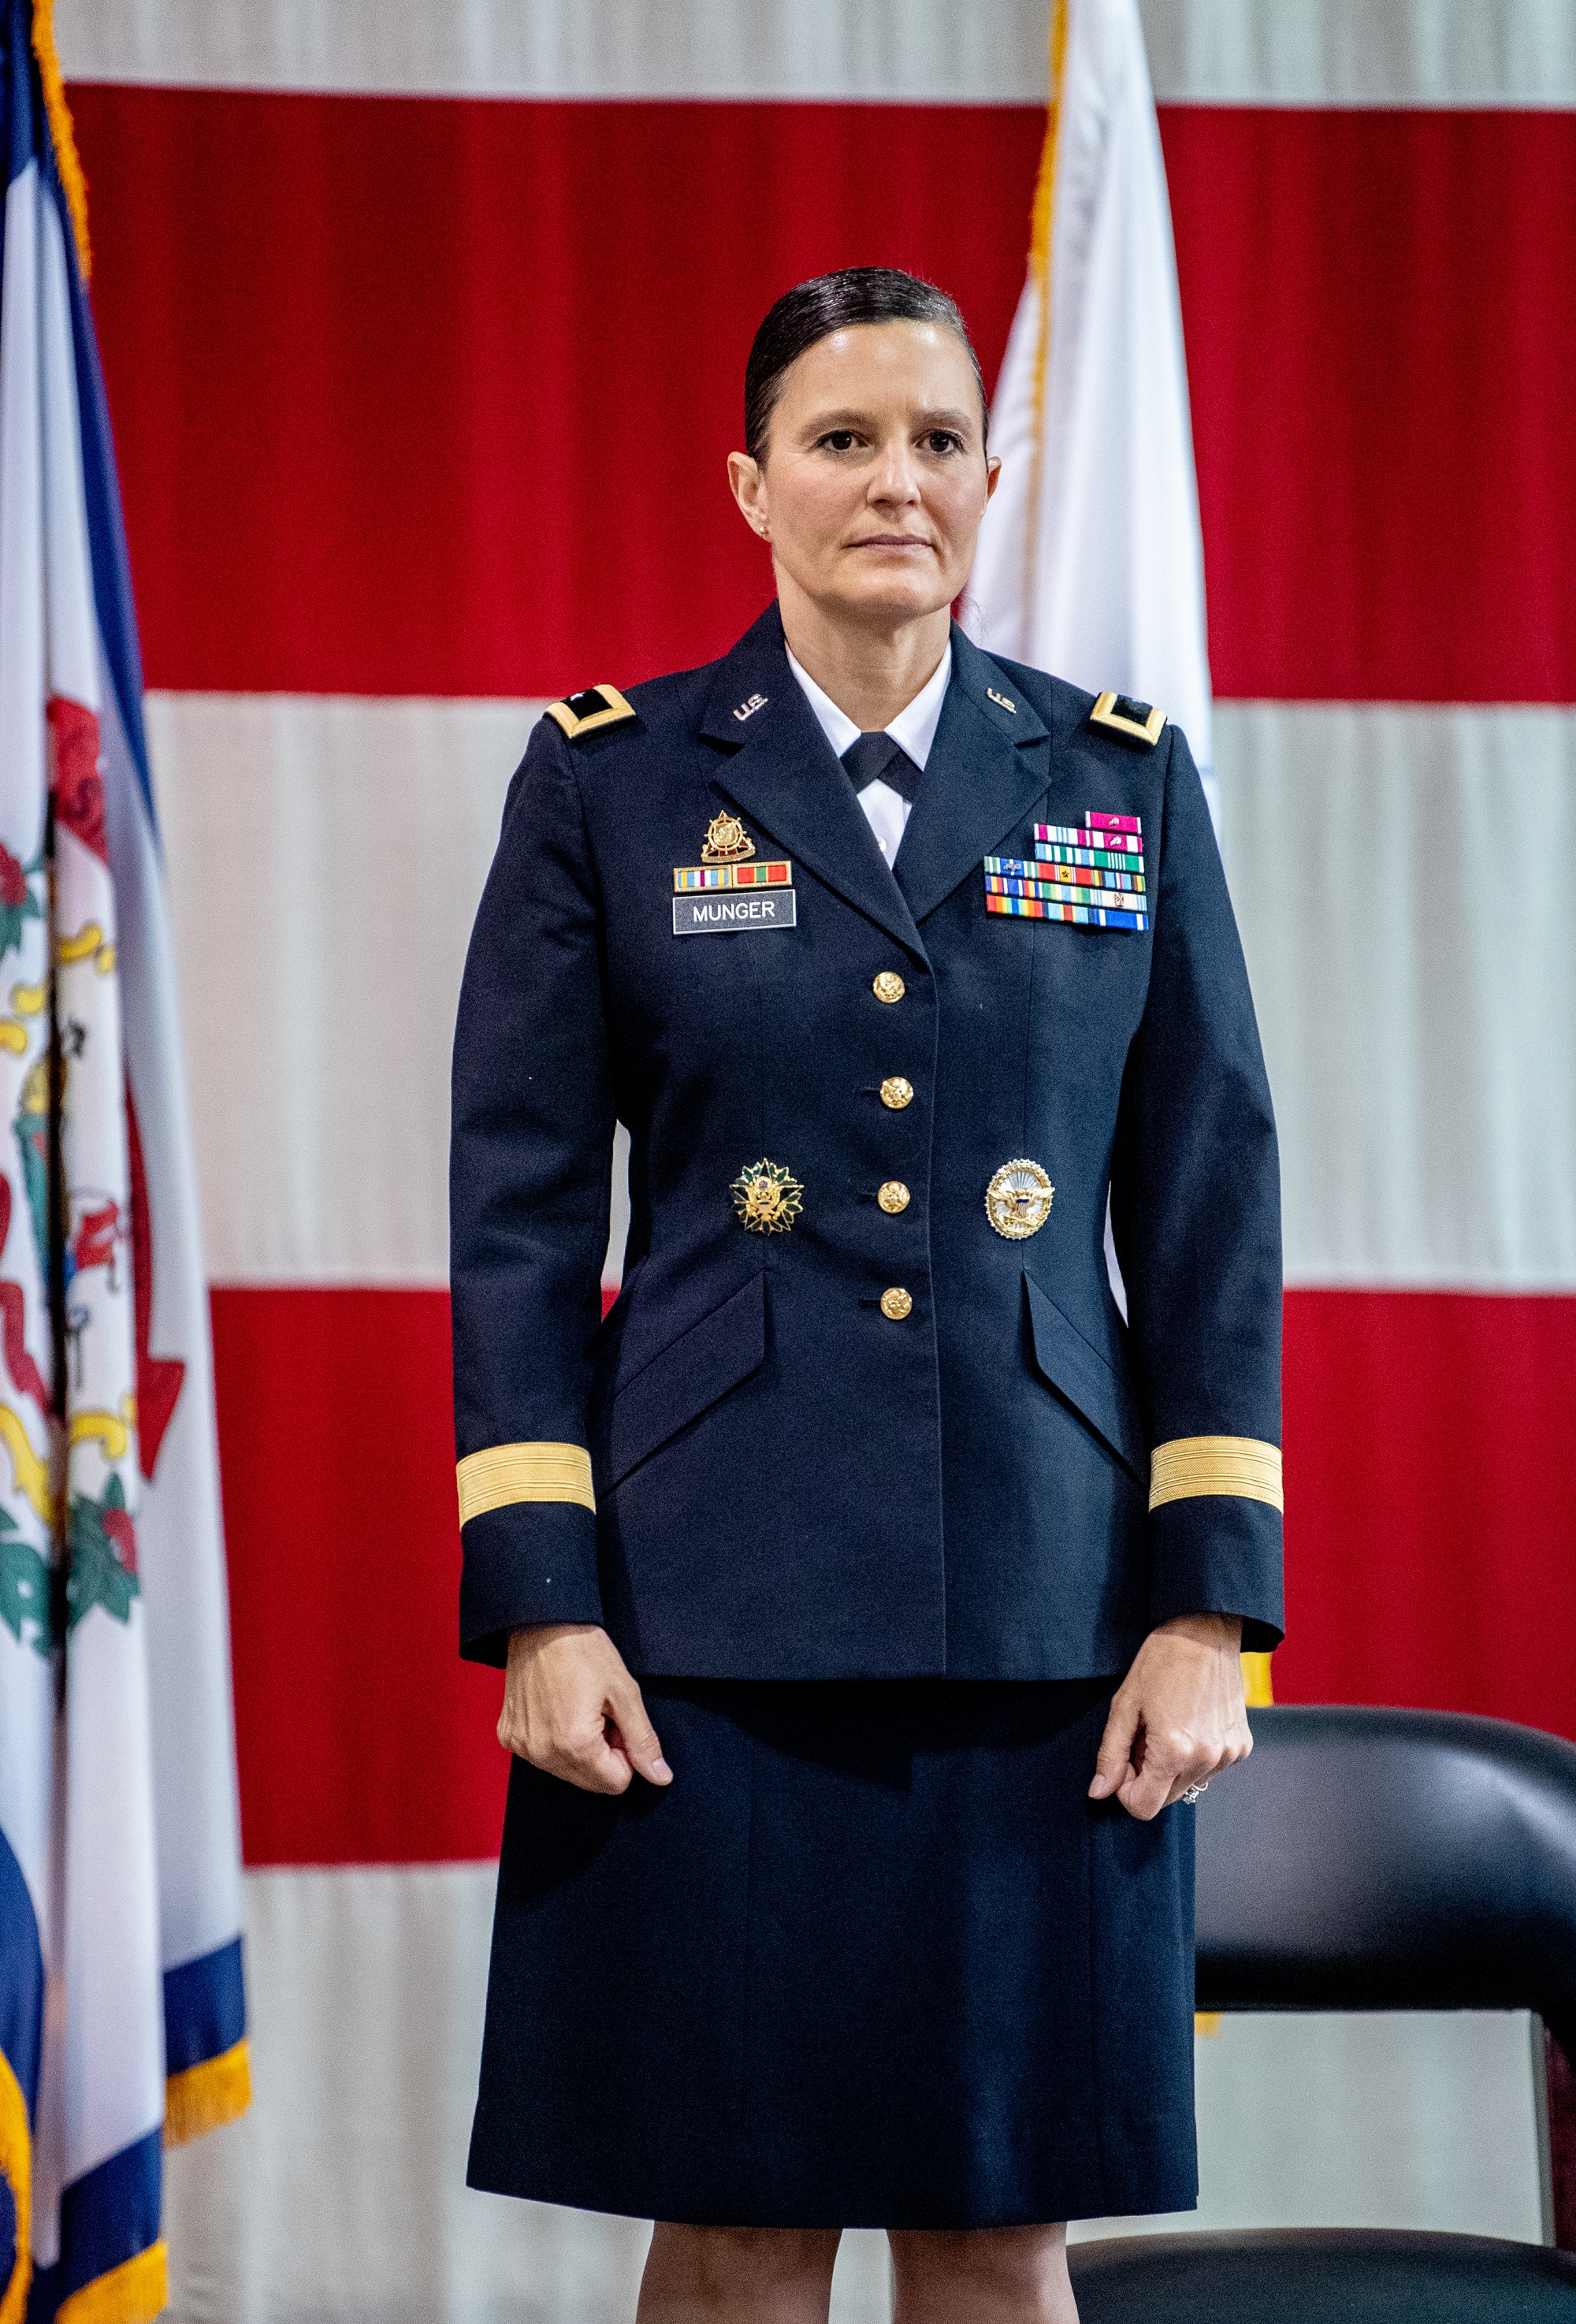 DVIDS - Images - W.Va. Army National Guard promotes first female